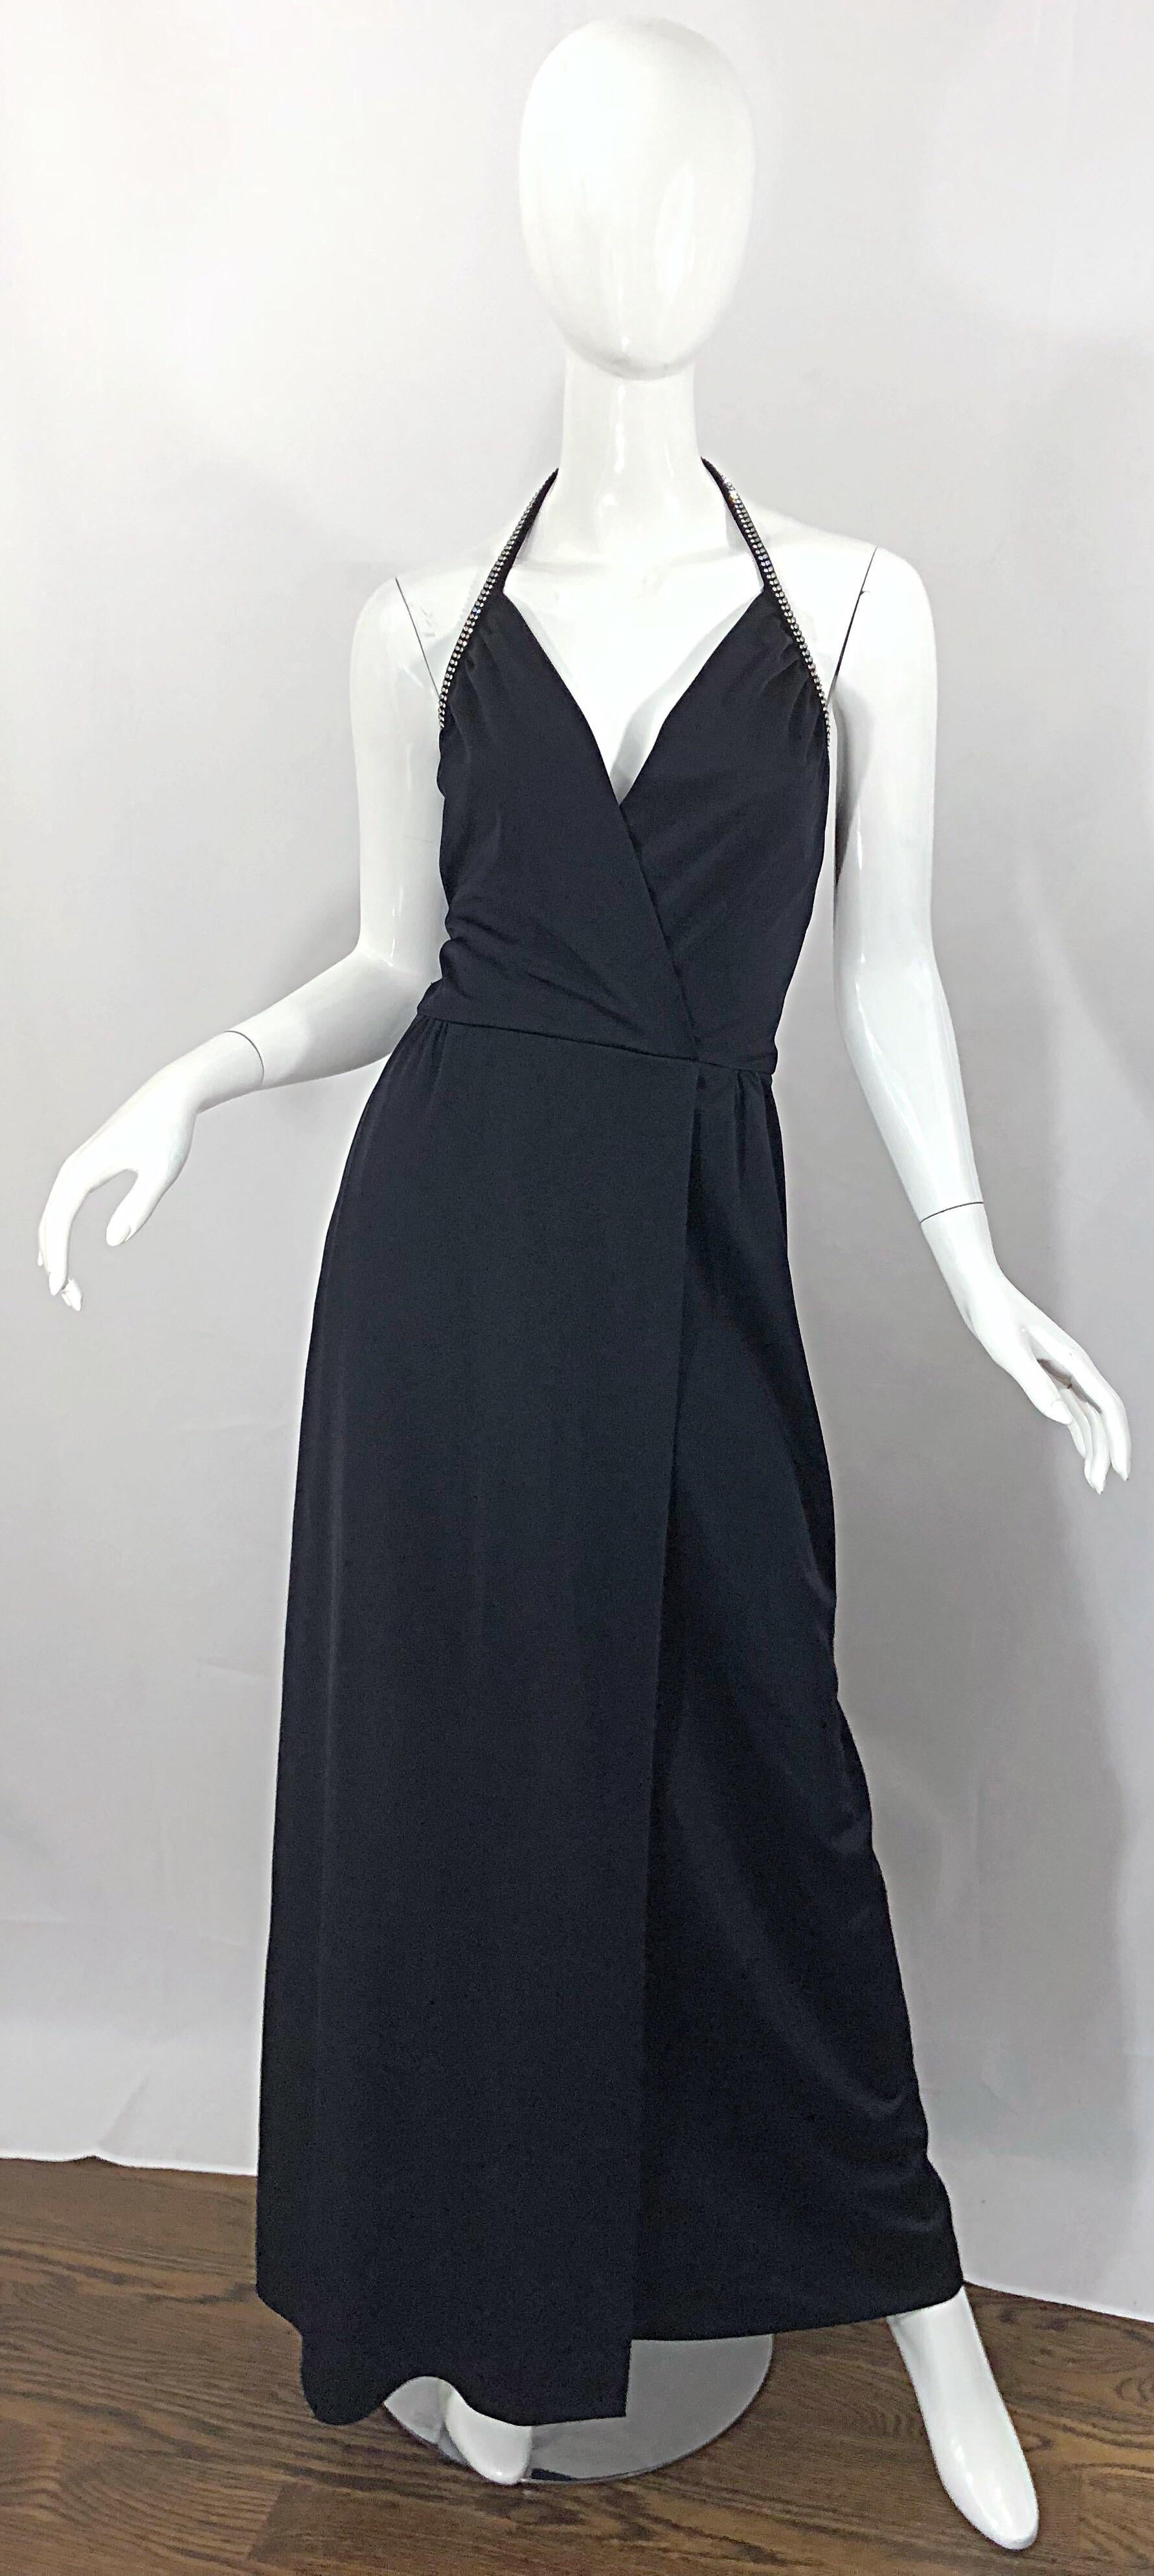 Sexy, yet classic 1970s LILLI DIAMOND black jersey rhinestone encrusted faux wrap jersey plunging Grecian halter gown / maxi dress! Features a fitted crossover bodice with a flattering and forgiving full skirt. Wonderful soft jersey fabric stretches